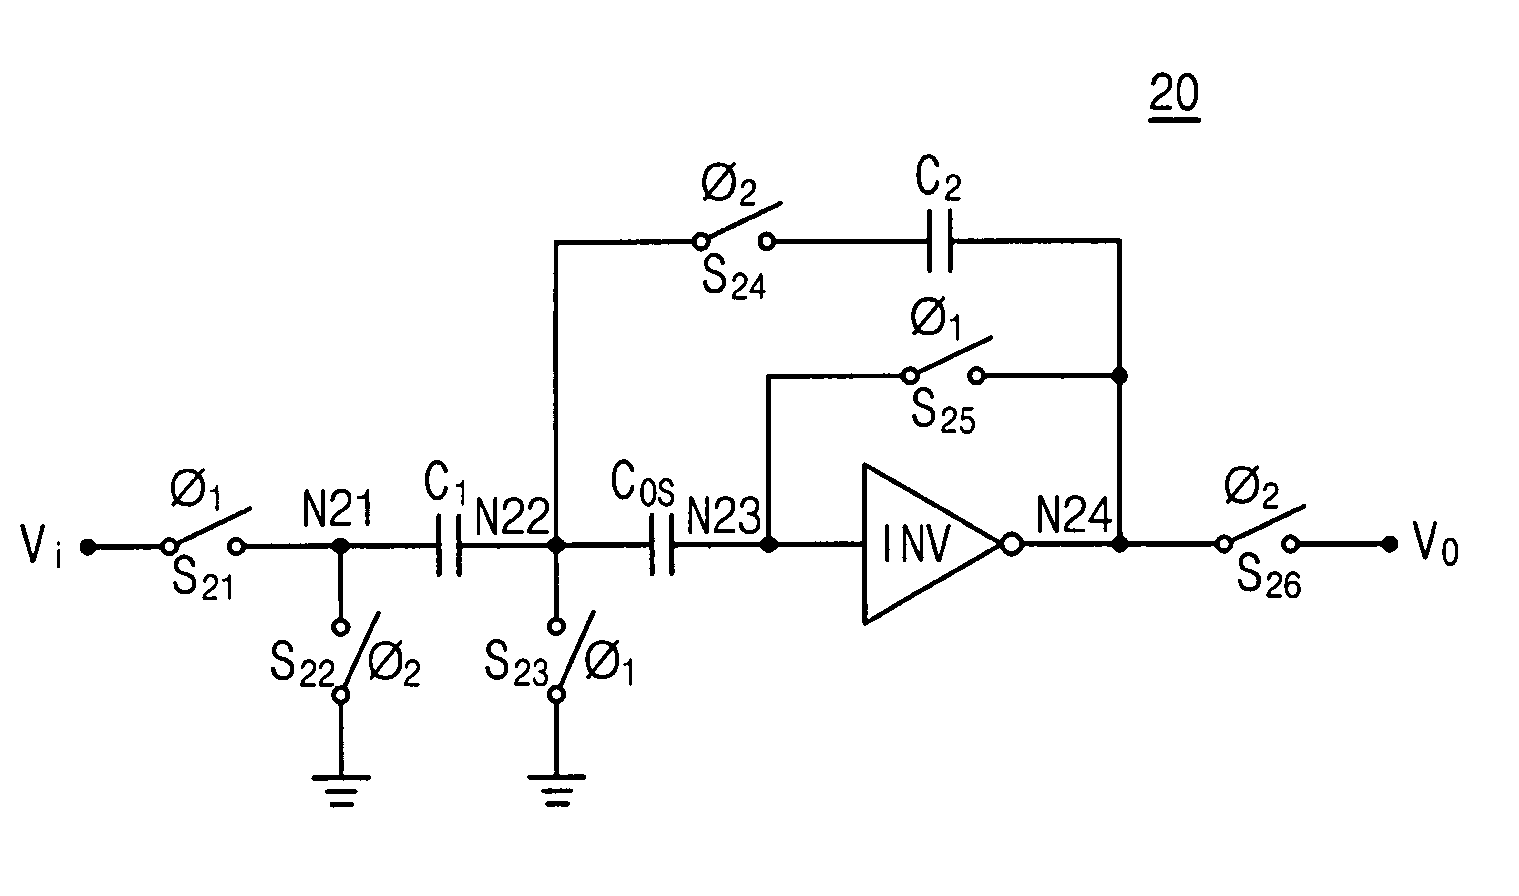 Switched capacitor circuit with inverting amplifier and offset unit